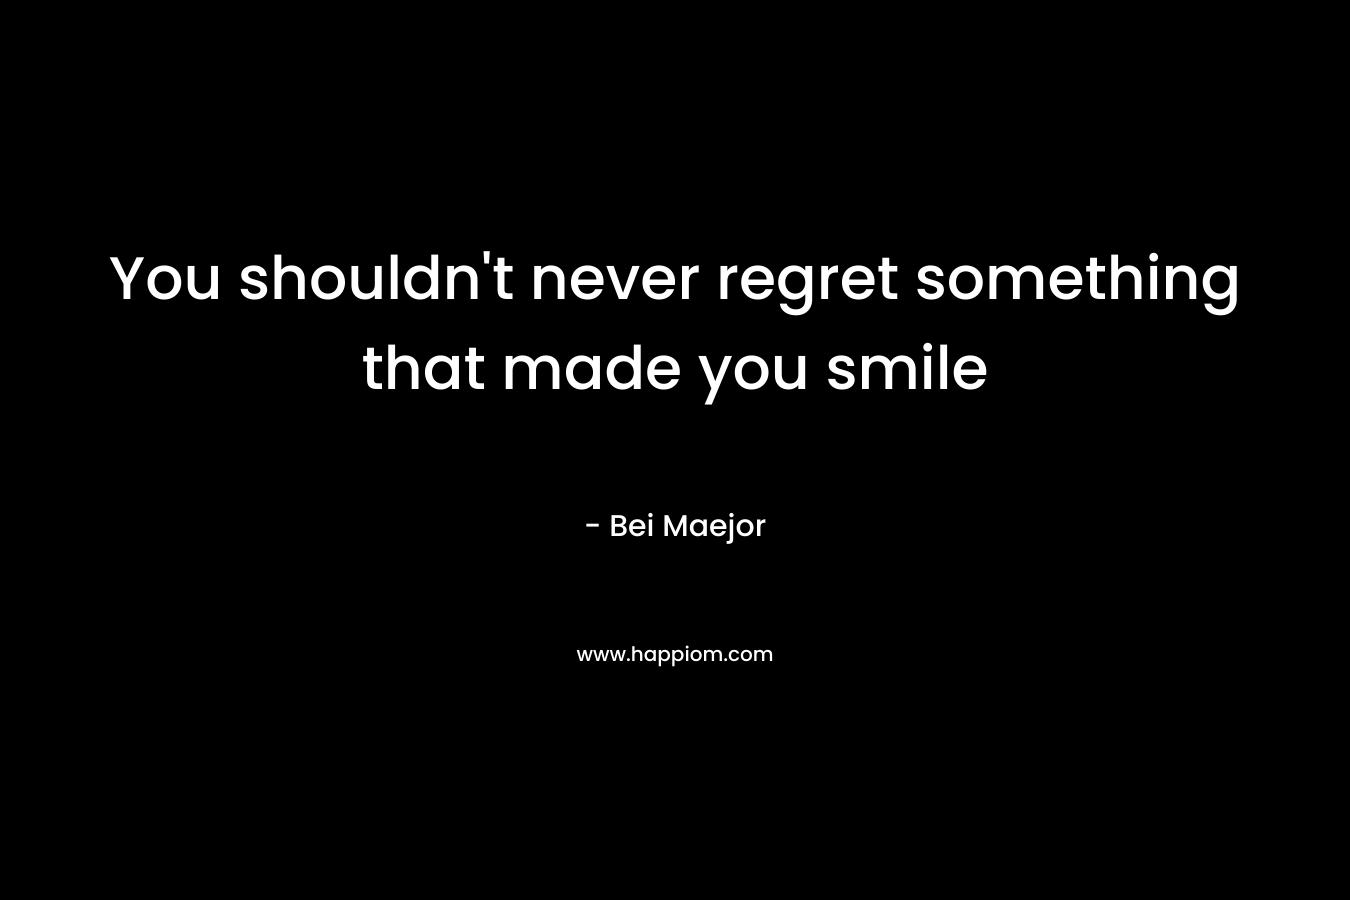 You shouldn't never regret something that made you smile